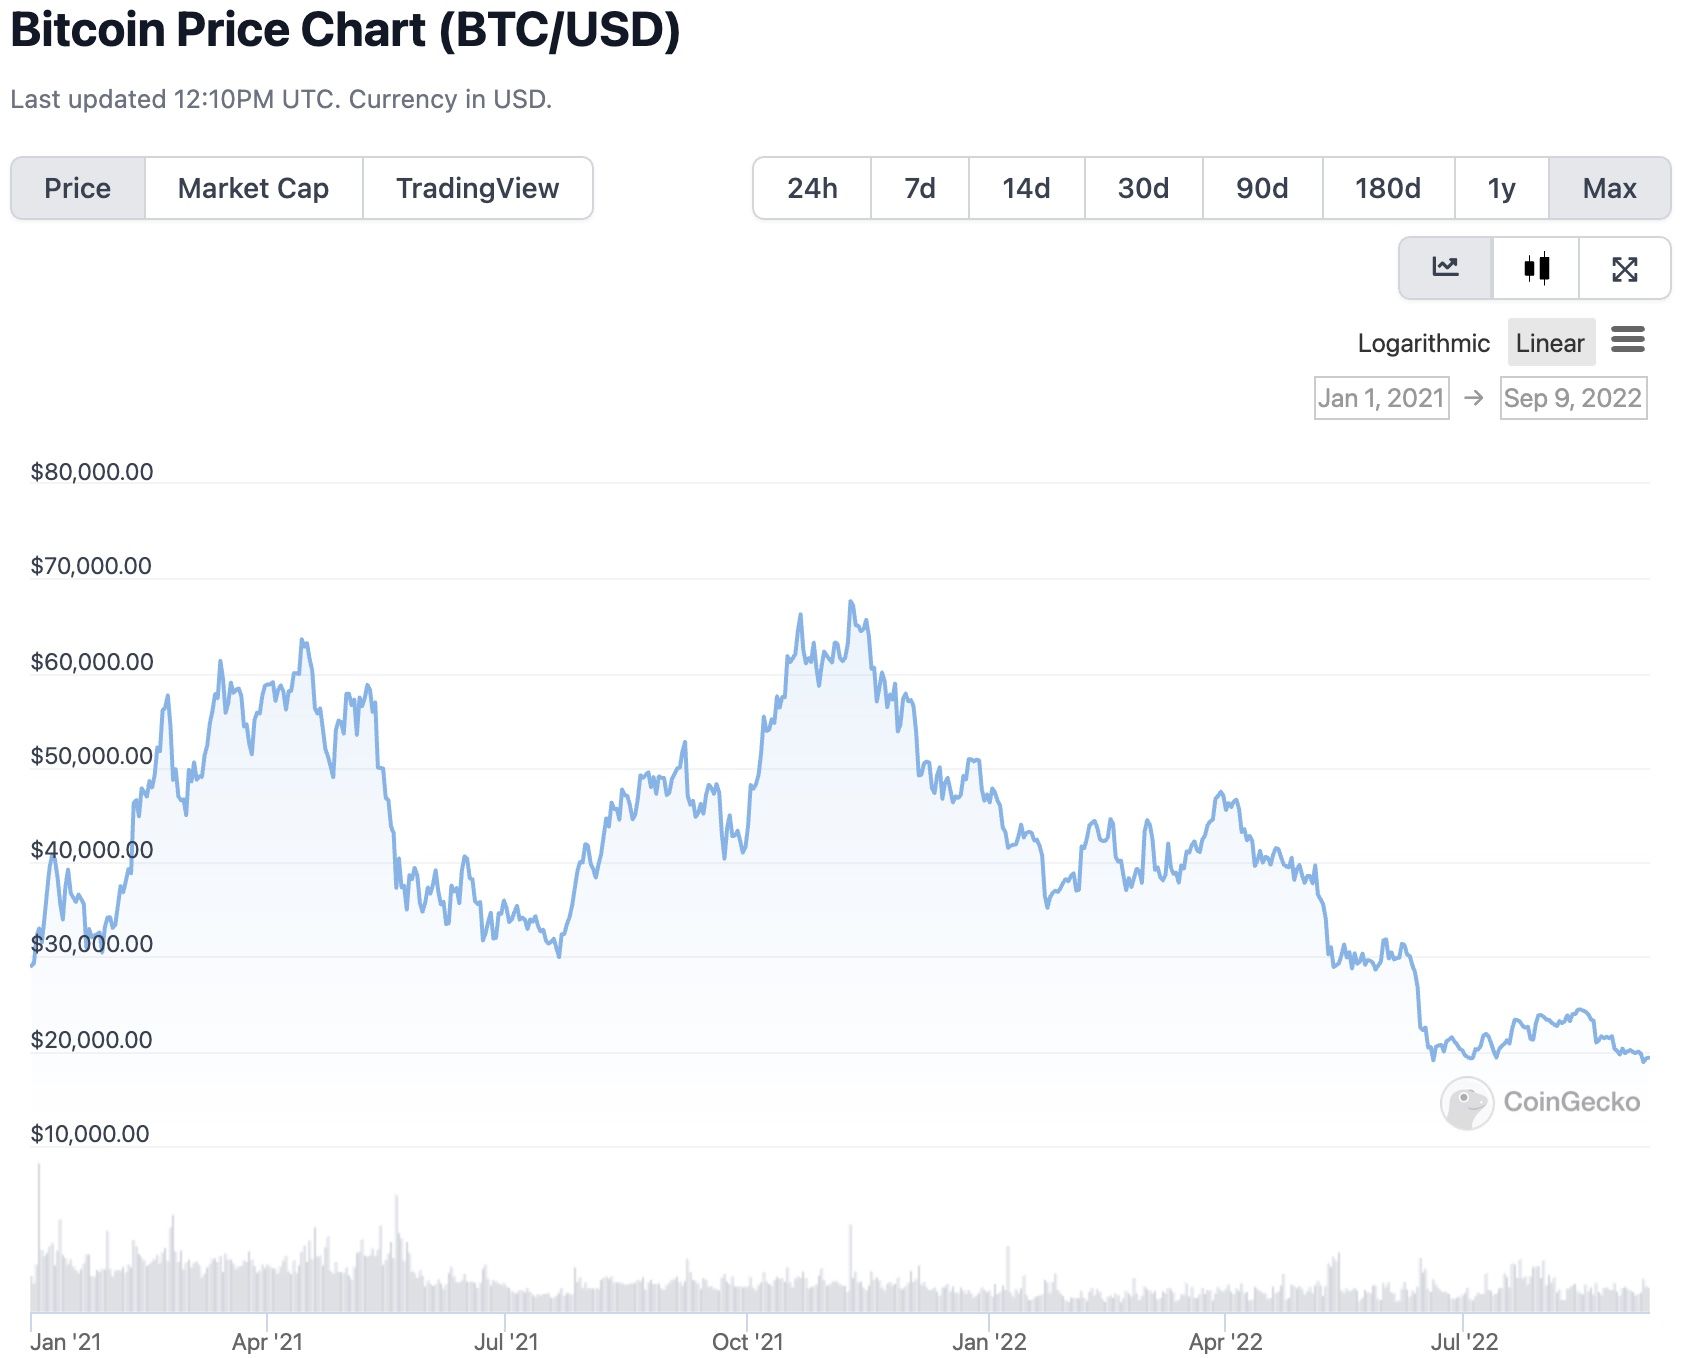 Graph from CoinGecko showing bitcoin's price chart